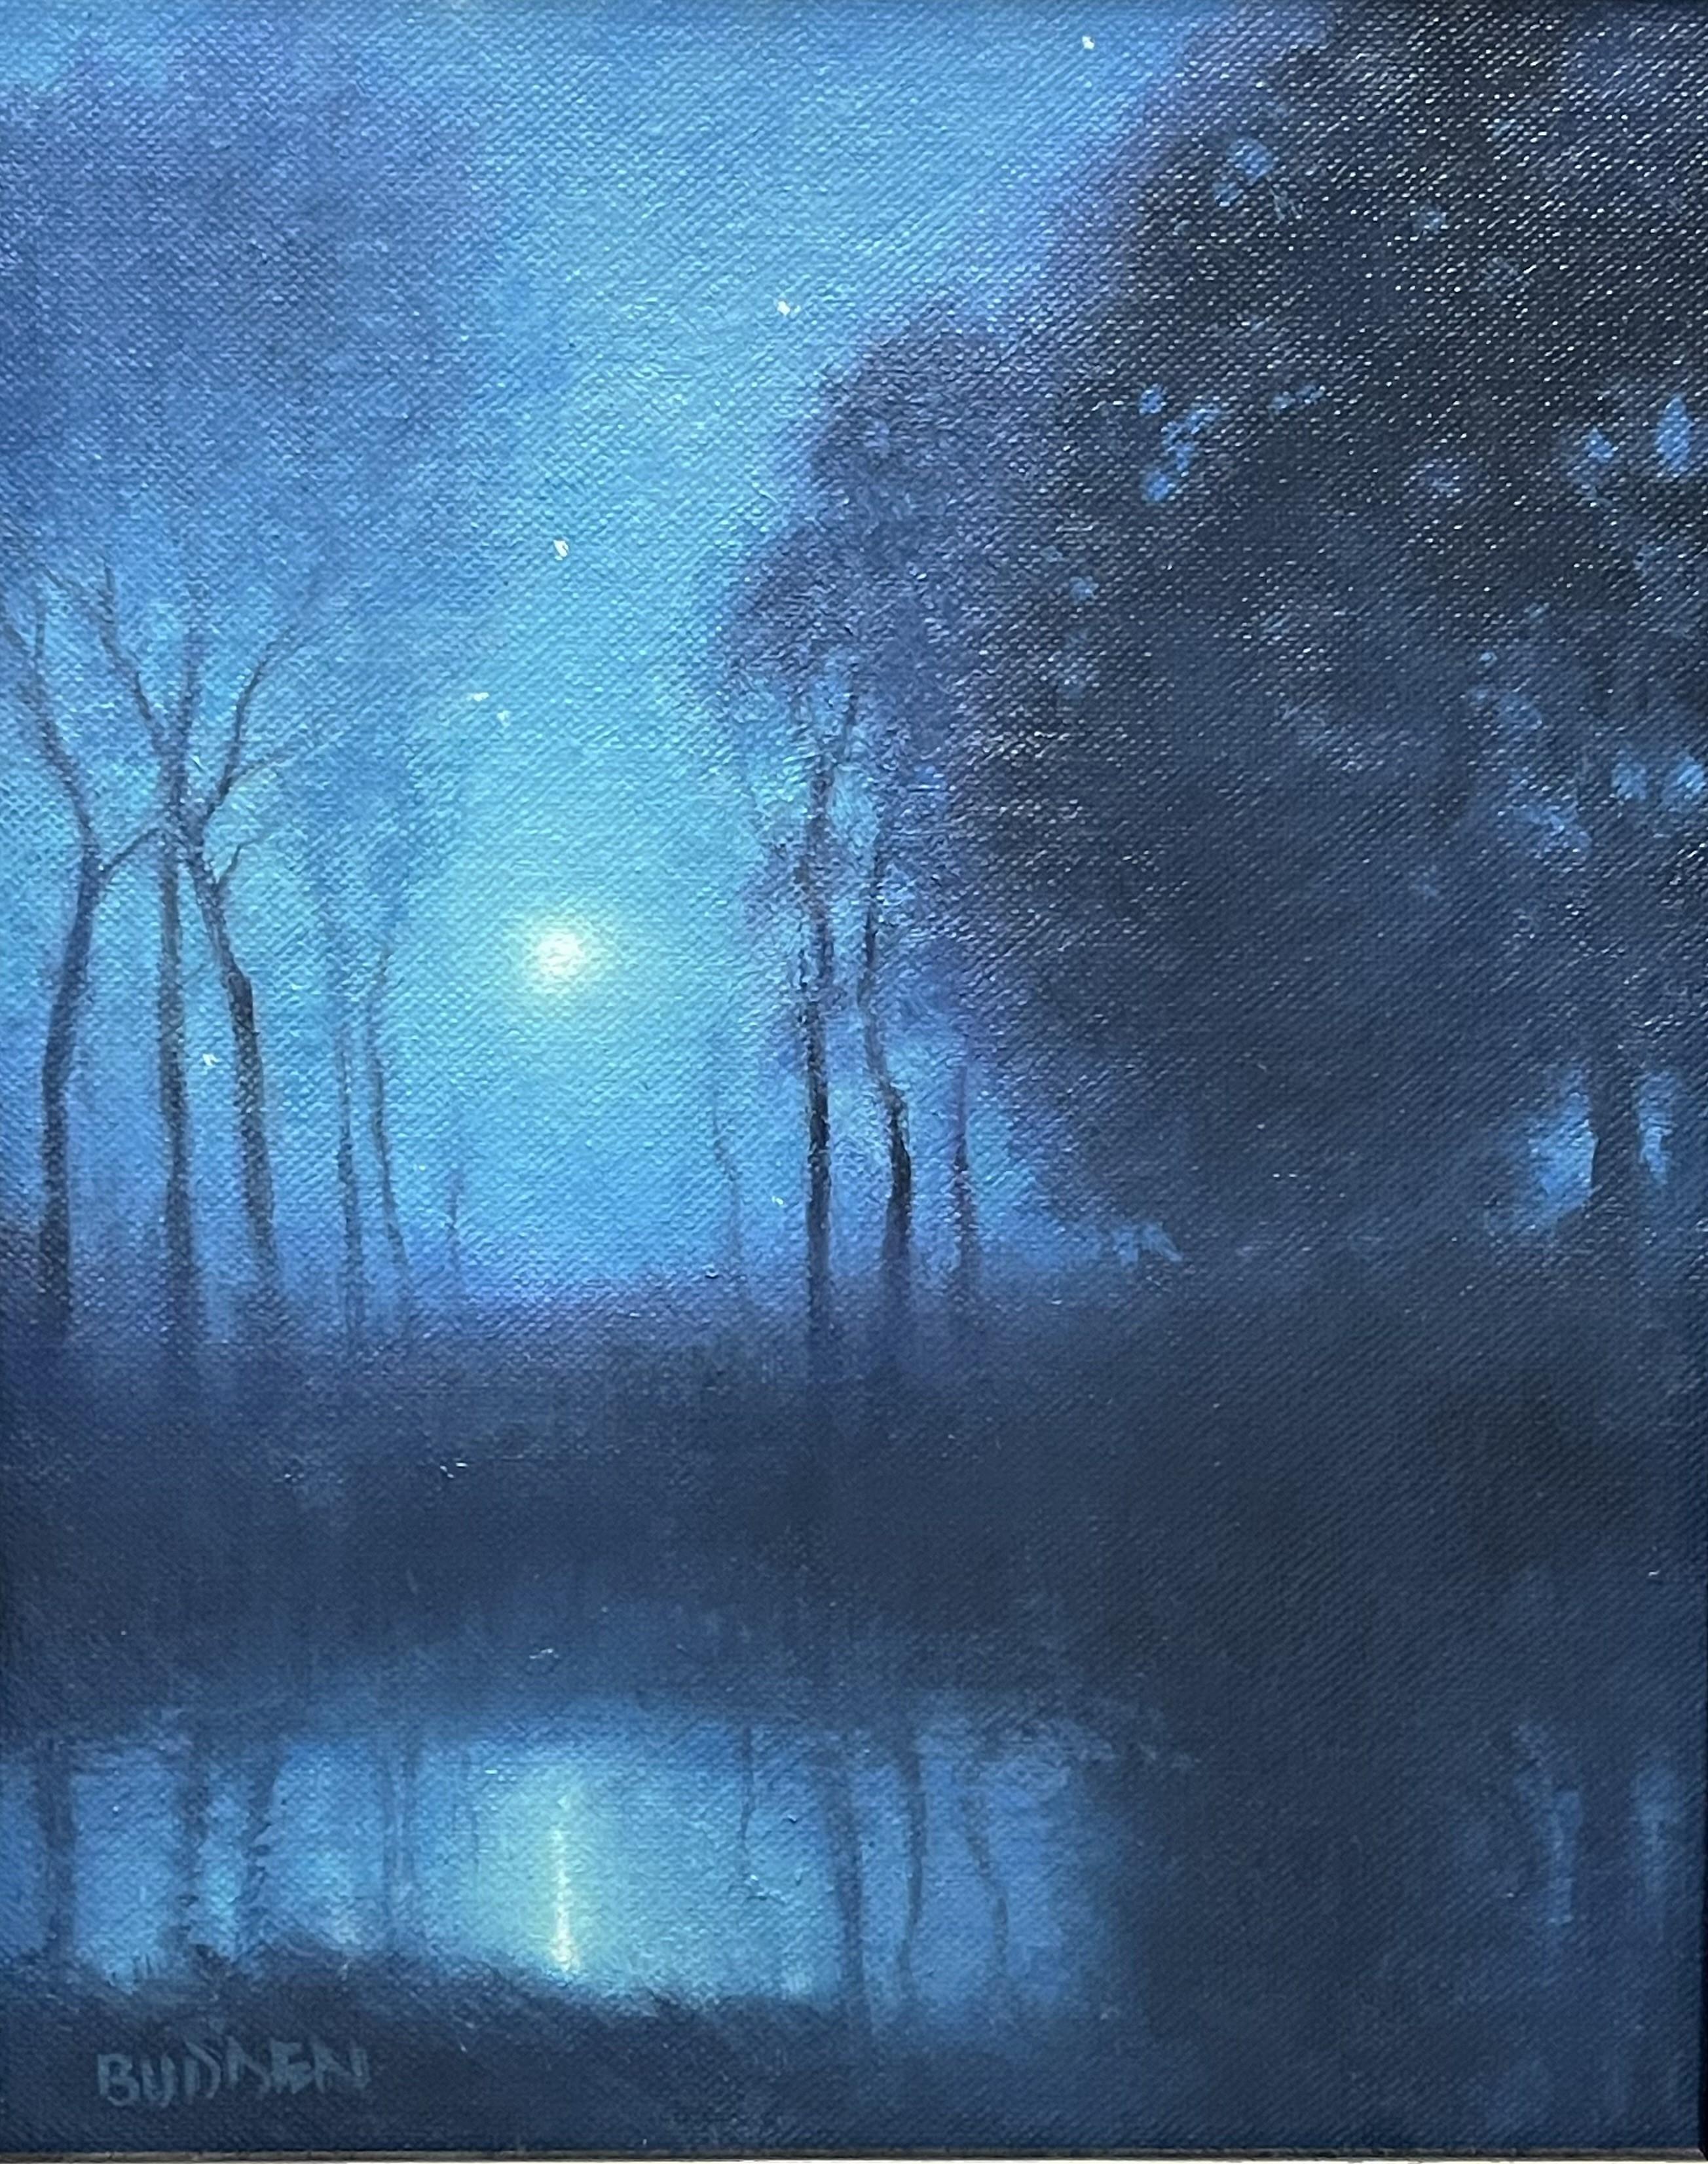  Impressionistic Moonlight Landscape Oil Painting Michael Budden  For Sale 1